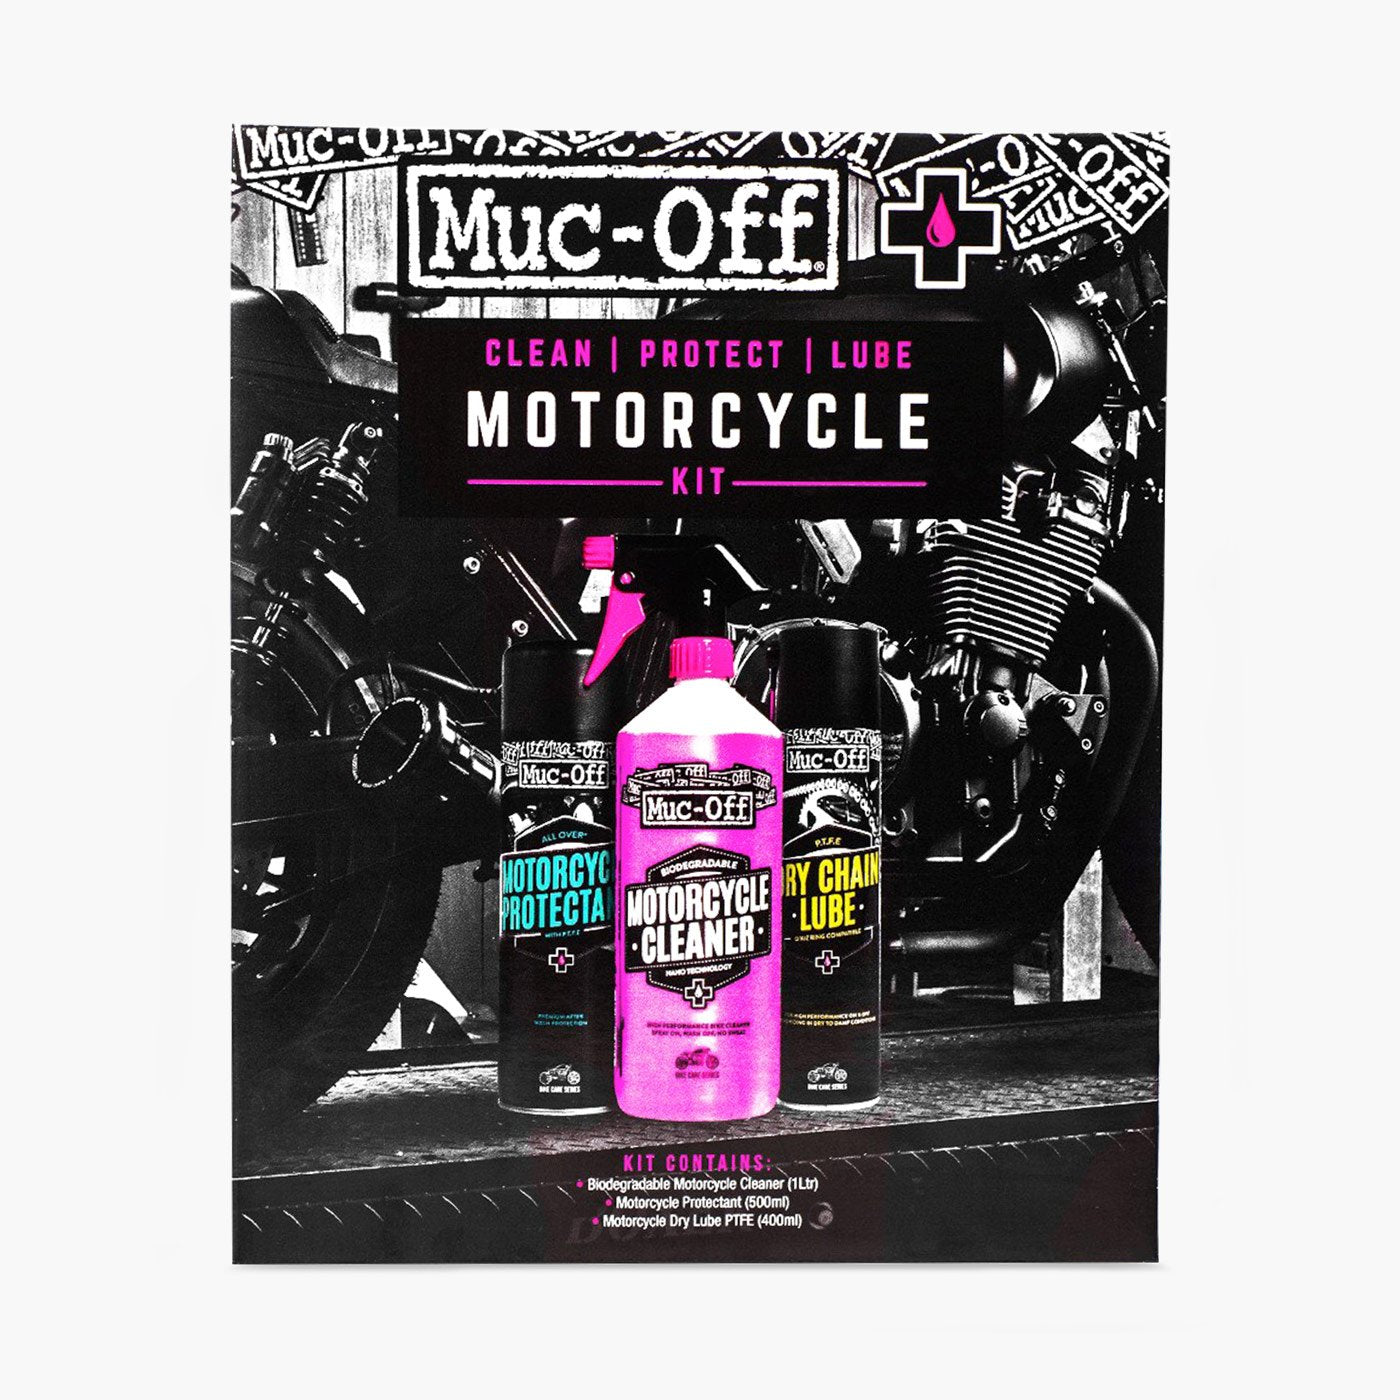 Muc-Off Motorcycle Clean-Protect-Lube / Kit Limpieza, Clean, Lubrica